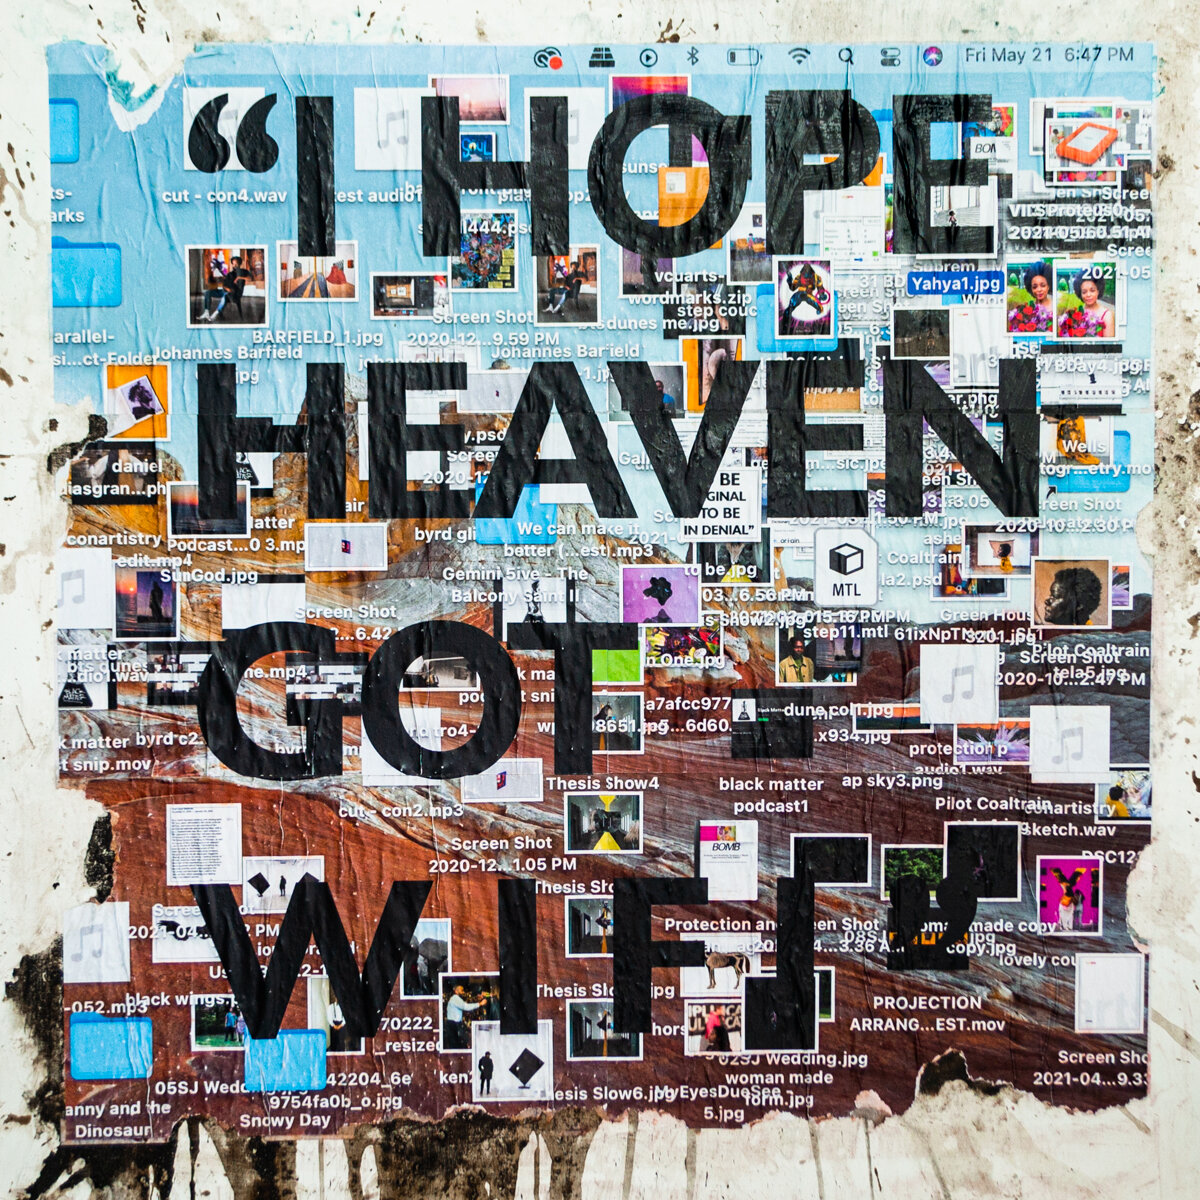   Joannes Barfield ,  I Hope Heaven Got Wifi , 2021, Asphalt, wheat paste and mixed media on stretched canvas, 36” X 36” 